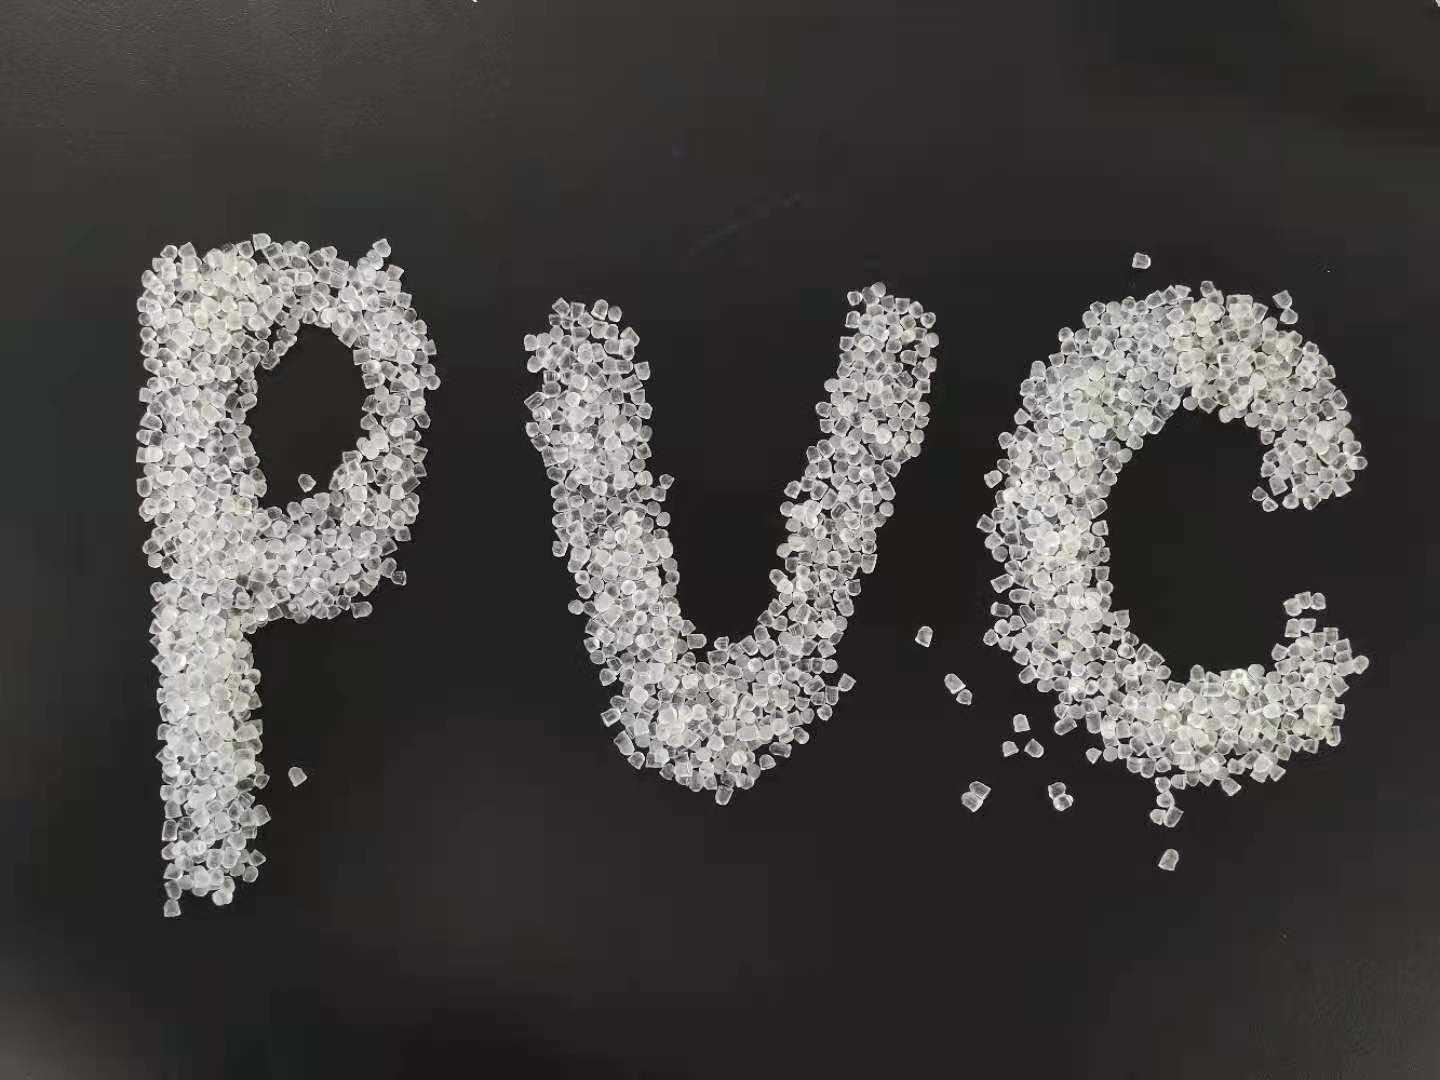 Wholesale Transparent Compound Virgin Pvc Plastic Granules Raw Material from china suppliers